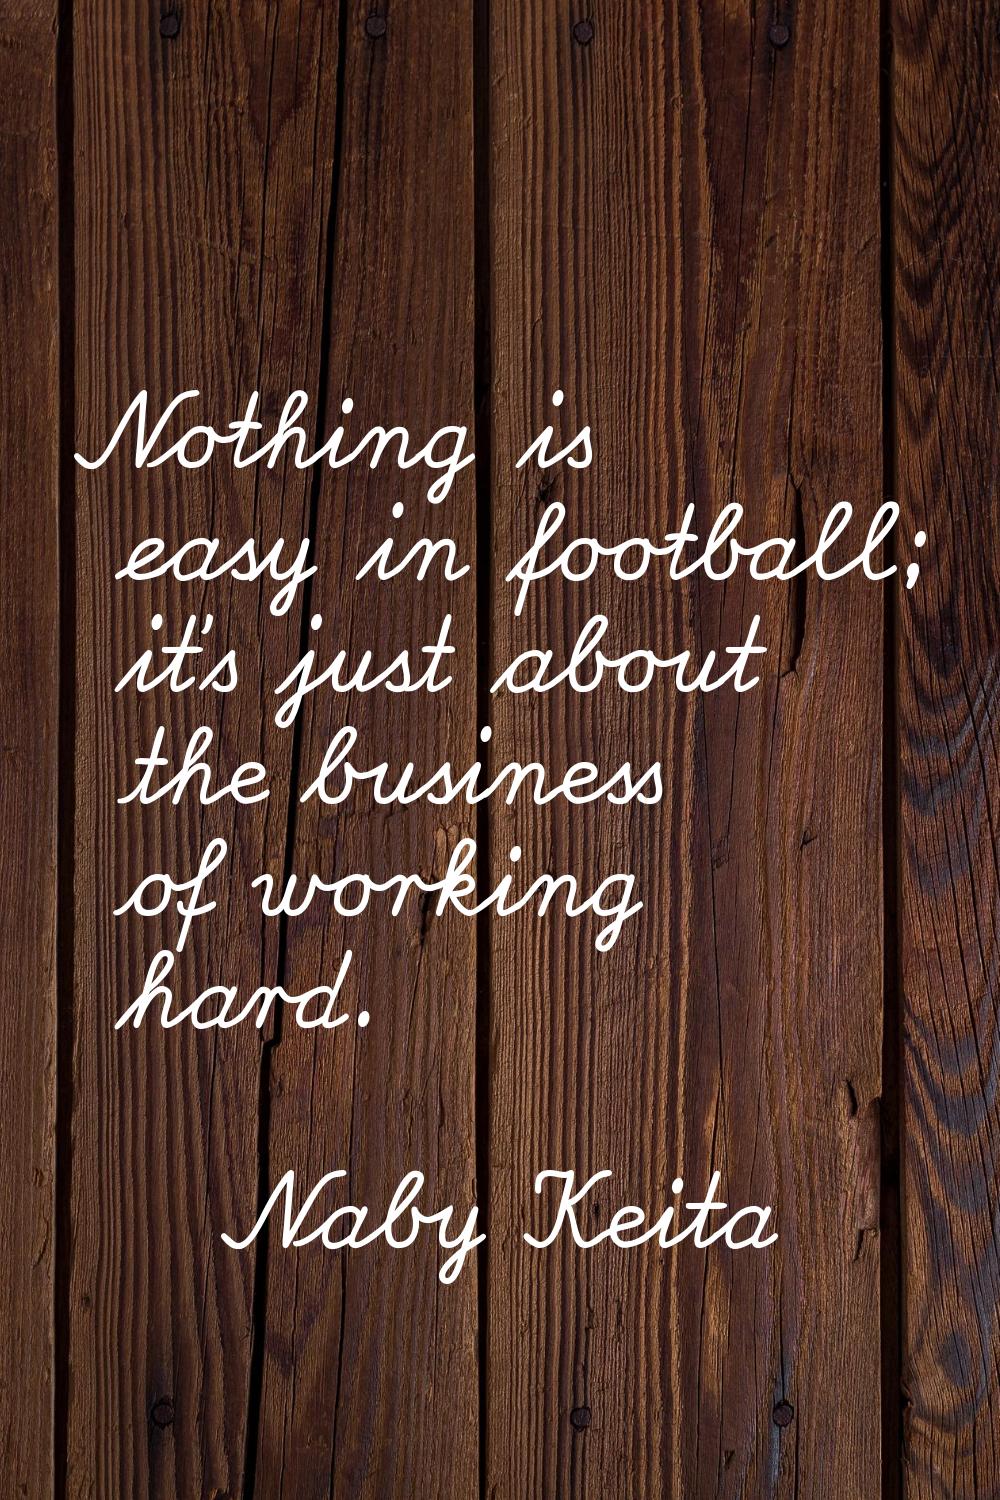 Nothing is easy in football; it's just about the business of working hard.